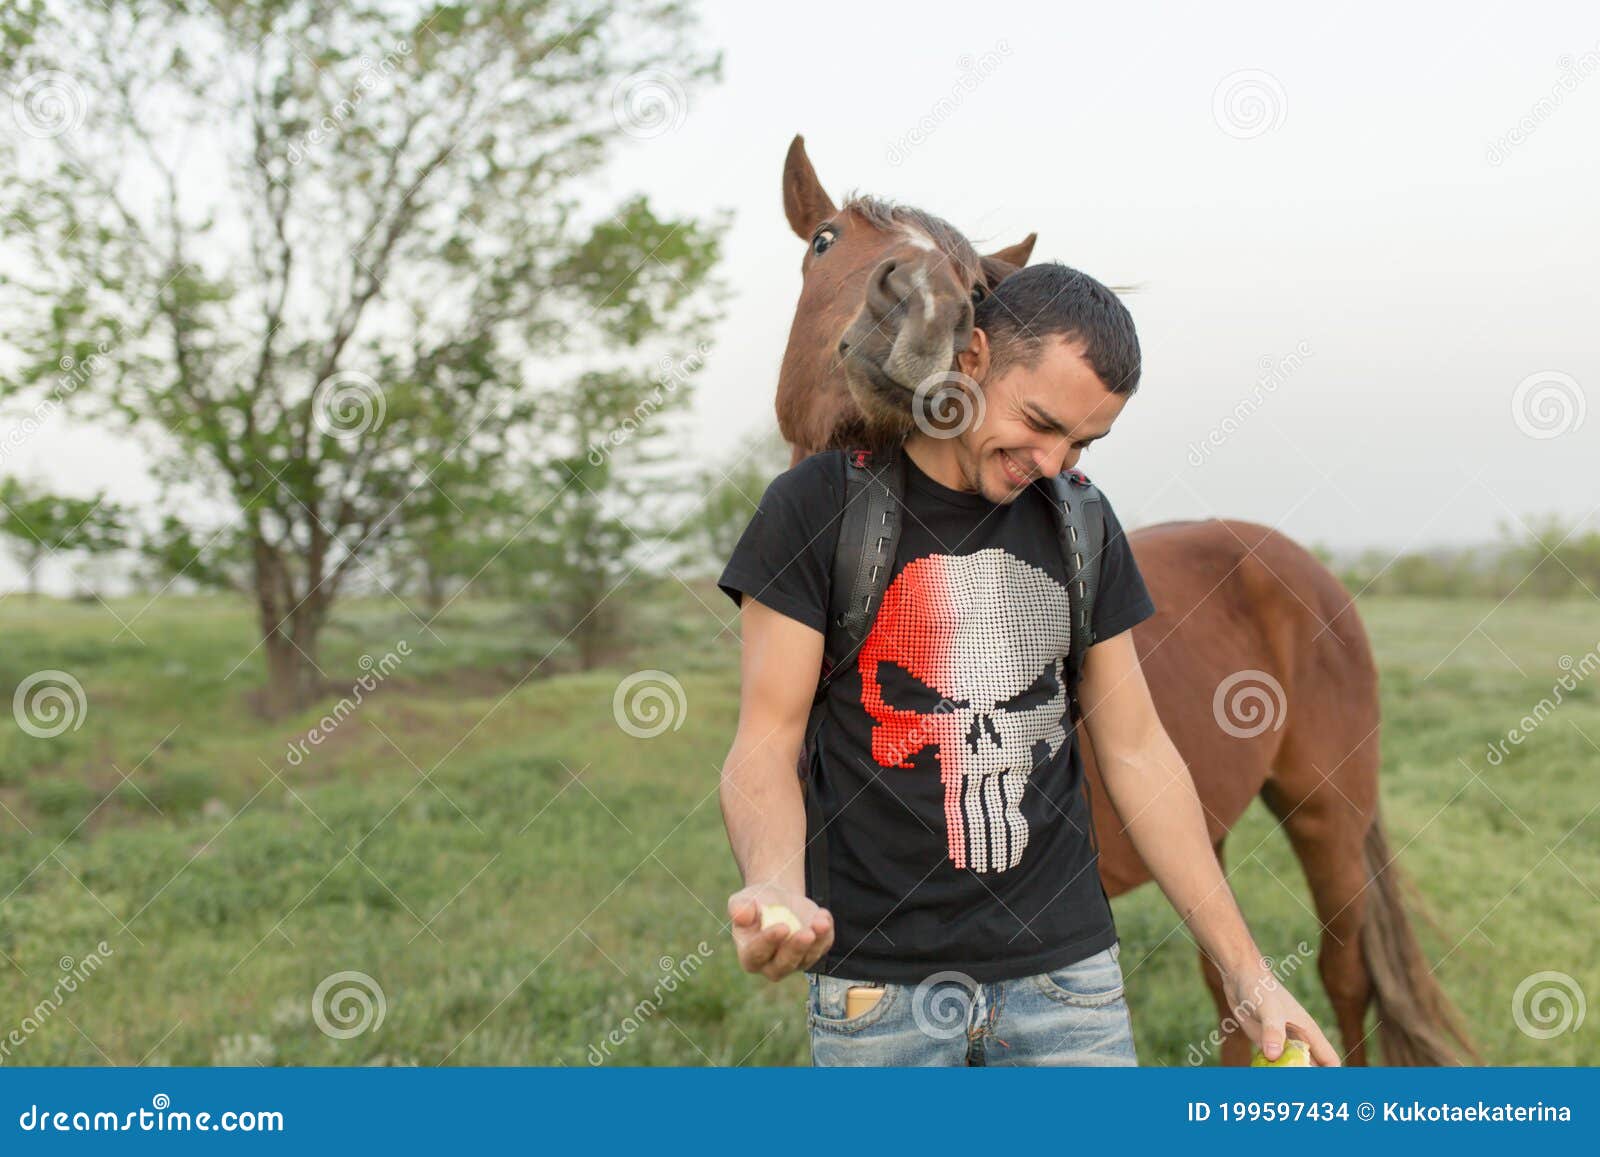 Guy with a Horse in a Green Field. Communication with Animals Stock Photo -  Image of lifestyle, cheerful: 199597434